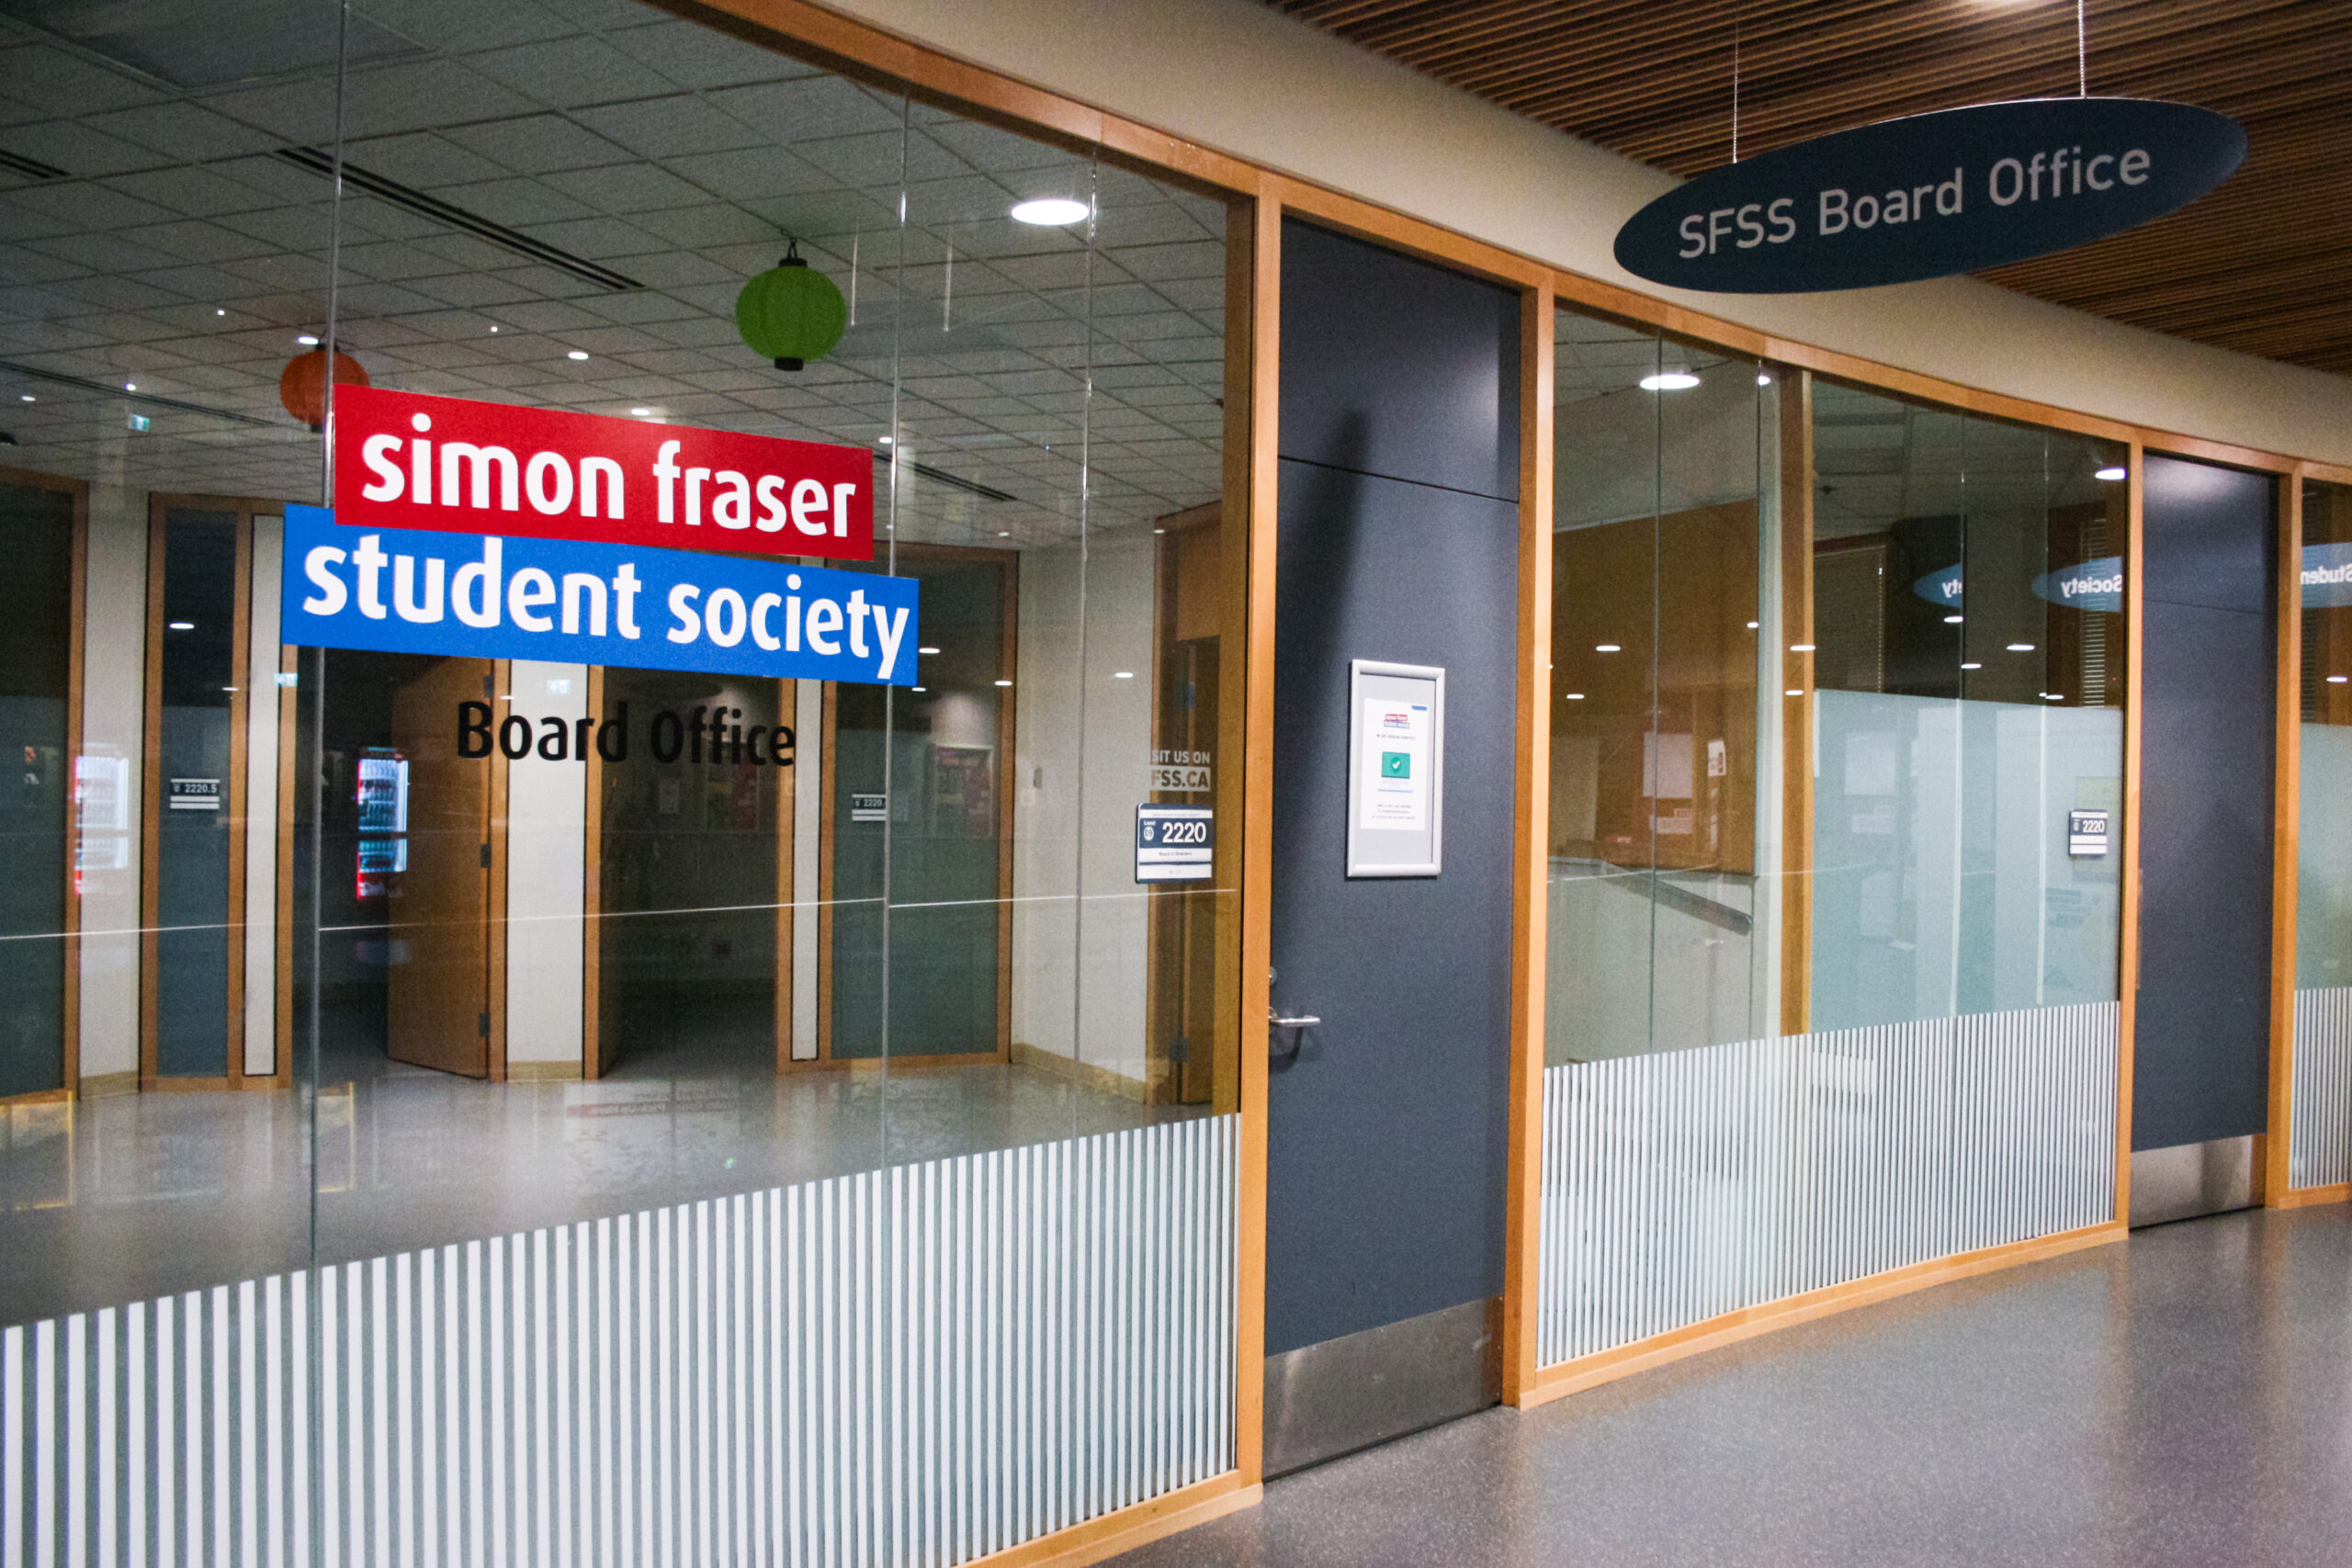 The photo is of the outside of the Simon Fraser Student Society's office. The office has large windows that have their logo printed out.